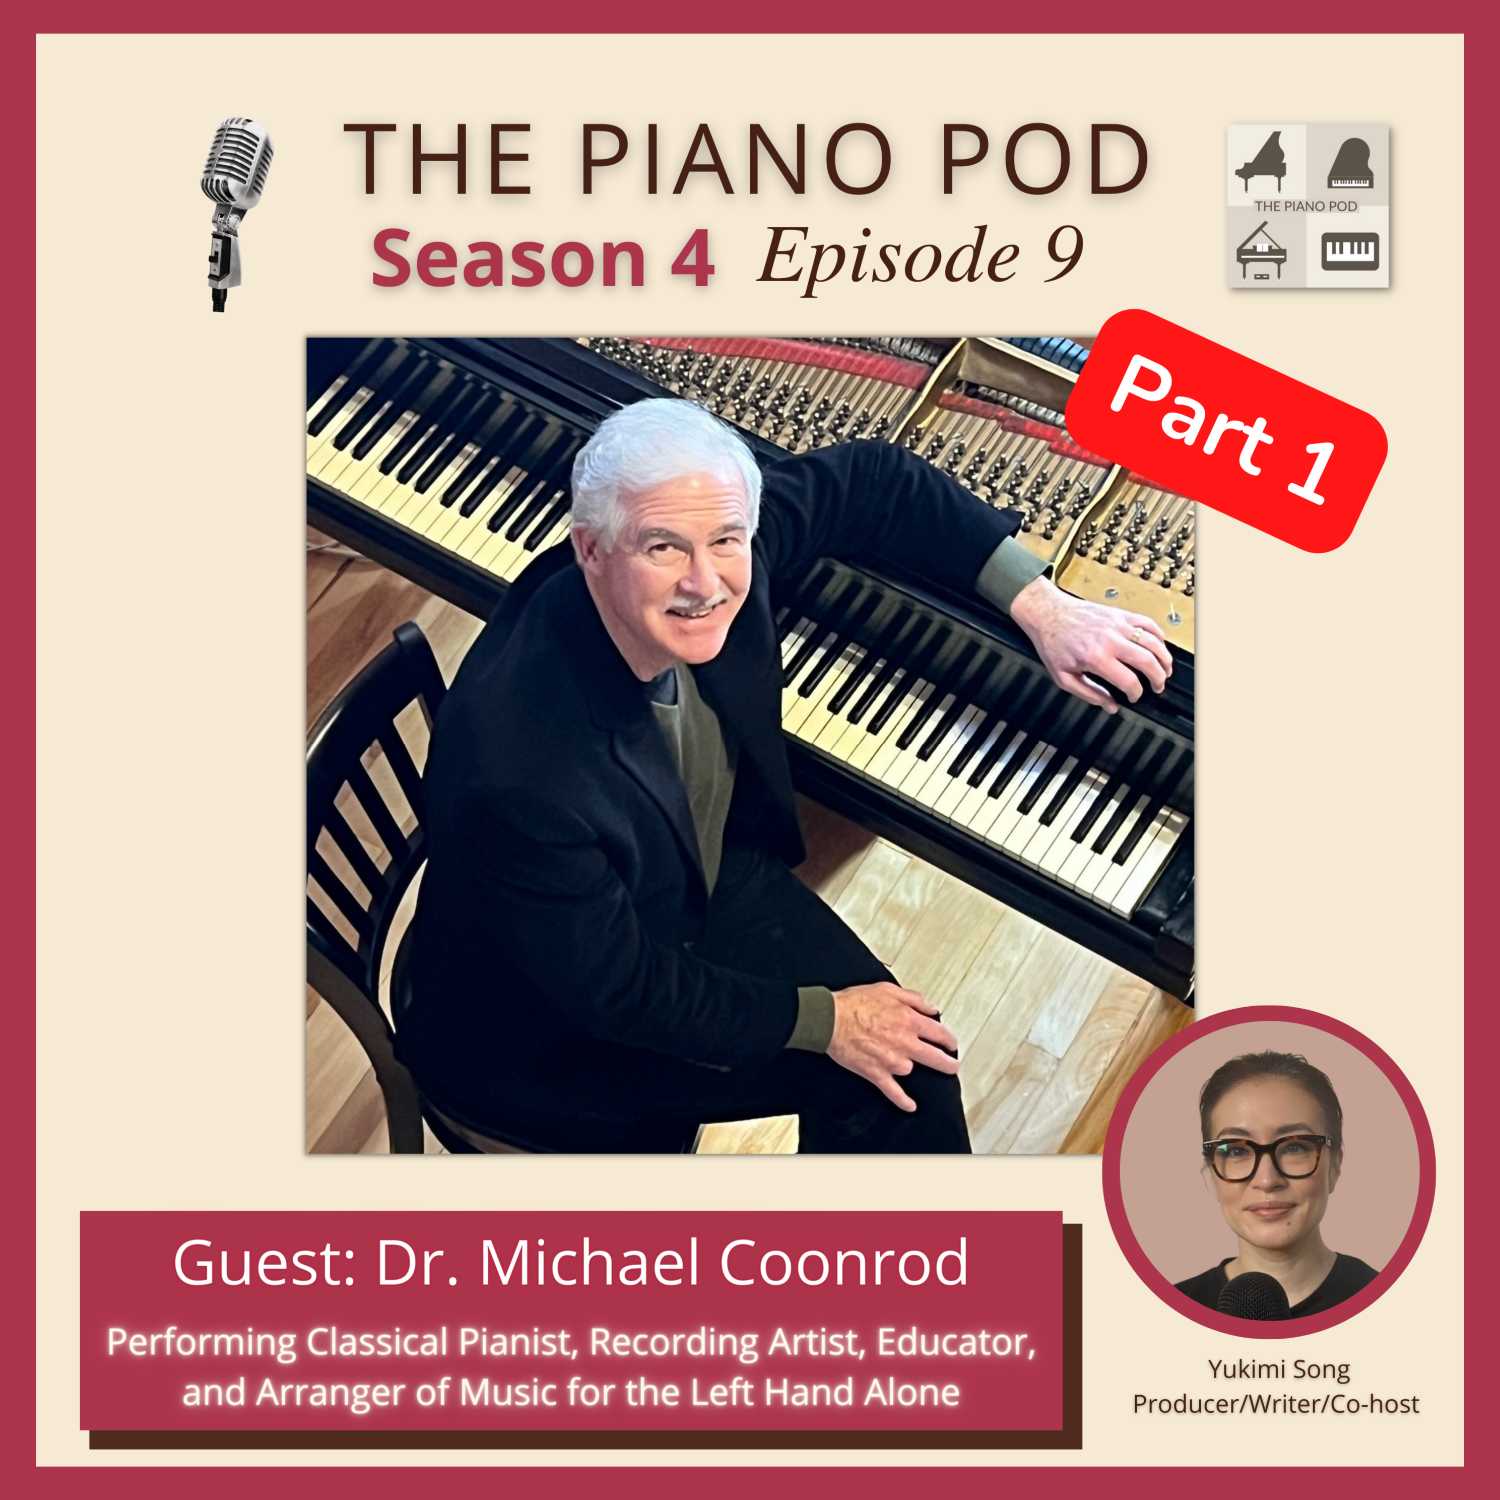 Part 1 of Season 4 Episode 9: Dr. Michael Coonrod -- Classical Pianist, Recording Artist, Educator, and Arranger specializing in music for the Left Hand Alone